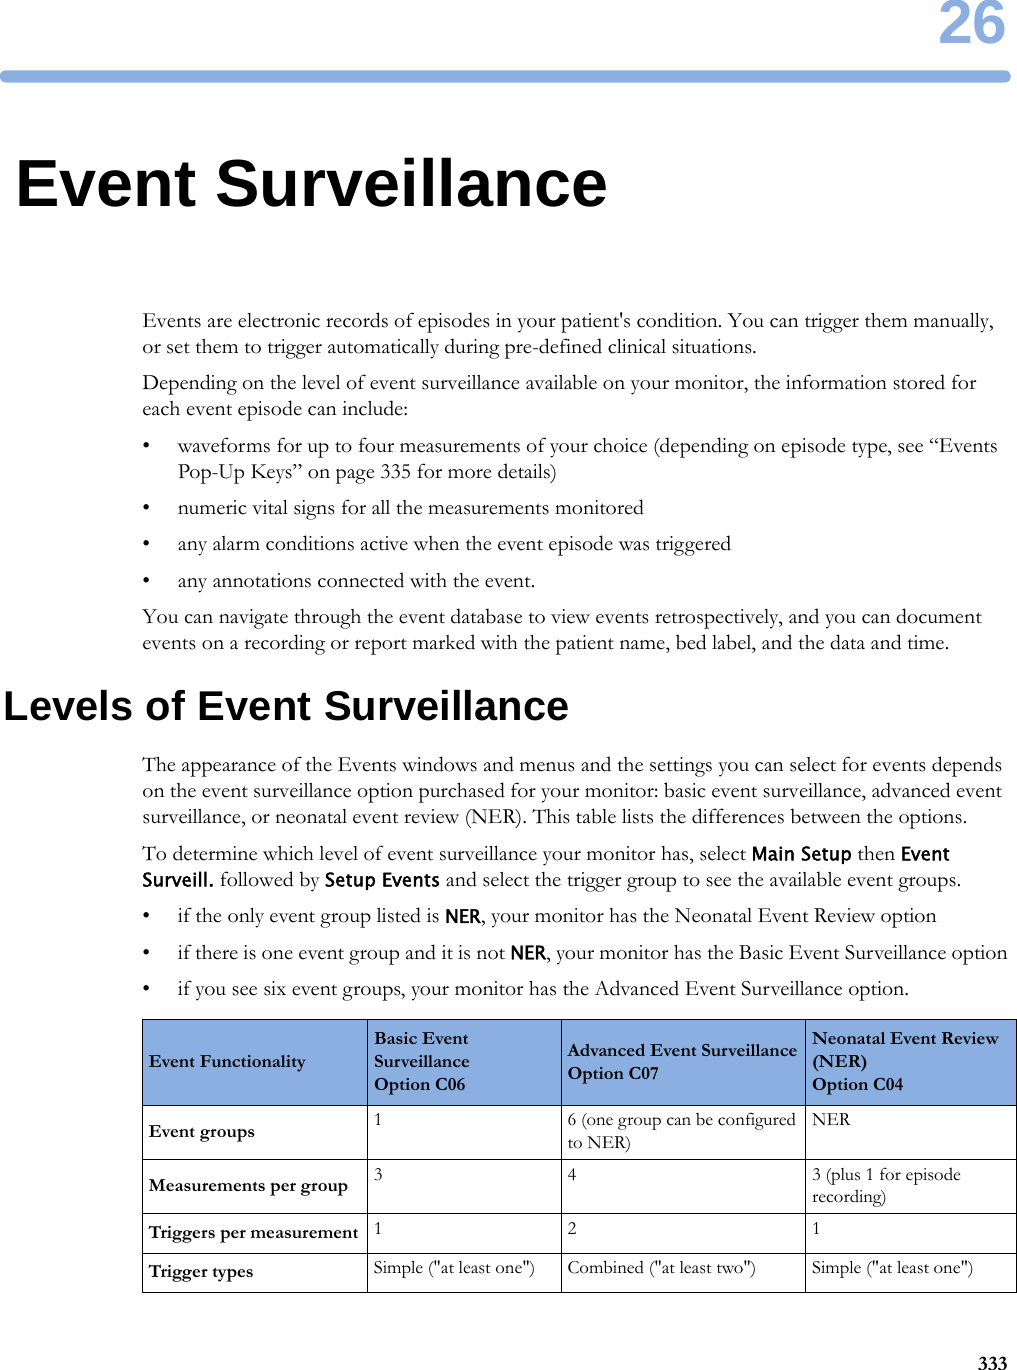 2633326Event SurveillanceEvents are electronic records of episodes in your patient&apos;s condition. You can trigger them manually, or set them to trigger automatically during pre-defined clinical situations.Depending on the level of event surveillance available on your monitor, the information stored for each event episode can include:• waveforms for up to four measurements of your choice (depending on episode type, see “Events Pop-Up Keys” on page 335 for more details)• numeric vital signs for all the measurements monitored• any alarm conditions active when the event episode was triggered• any annotations connected with the event.You can navigate through the event database to view events retrospectively, and you can document events on a recording or report marked with the patient name, bed label, and the data and time.Levels of Event SurveillanceThe appearance of the Events windows and menus and the settings you can select for events depends on the event surveillance option purchased for your monitor: basic event surveillance, advanced event surveillance, or neonatal event review (NER). This table lists the differences between the options.To determine which level of event surveillance your monitor has, select Main Setup then Event Surveill. followed by Setup Events and select the trigger group to see the available event groups.• if the only event group listed is NER, your monitor has the Neonatal Event Review option• if there is one event group and it is not NER, your monitor has the Basic Event Surveillance option• if you see six event groups, your monitor has the Advanced Event Surveillance option.Event FunctionalityBasic Event Surveillance Option C06Advanced Event SurveillanceOption C07Neonatal Event Review (NER)Option C04Event groups 1 6 (one group can be configured to NER)NERMeasurements per group 3 4 3 (plus 1 for episode recording)Triggers per measurement 12 1Trigger types Simple (&quot;at least one&quot;) Combined (&quot;at least two&quot;) Simple (&quot;at least one&quot;)